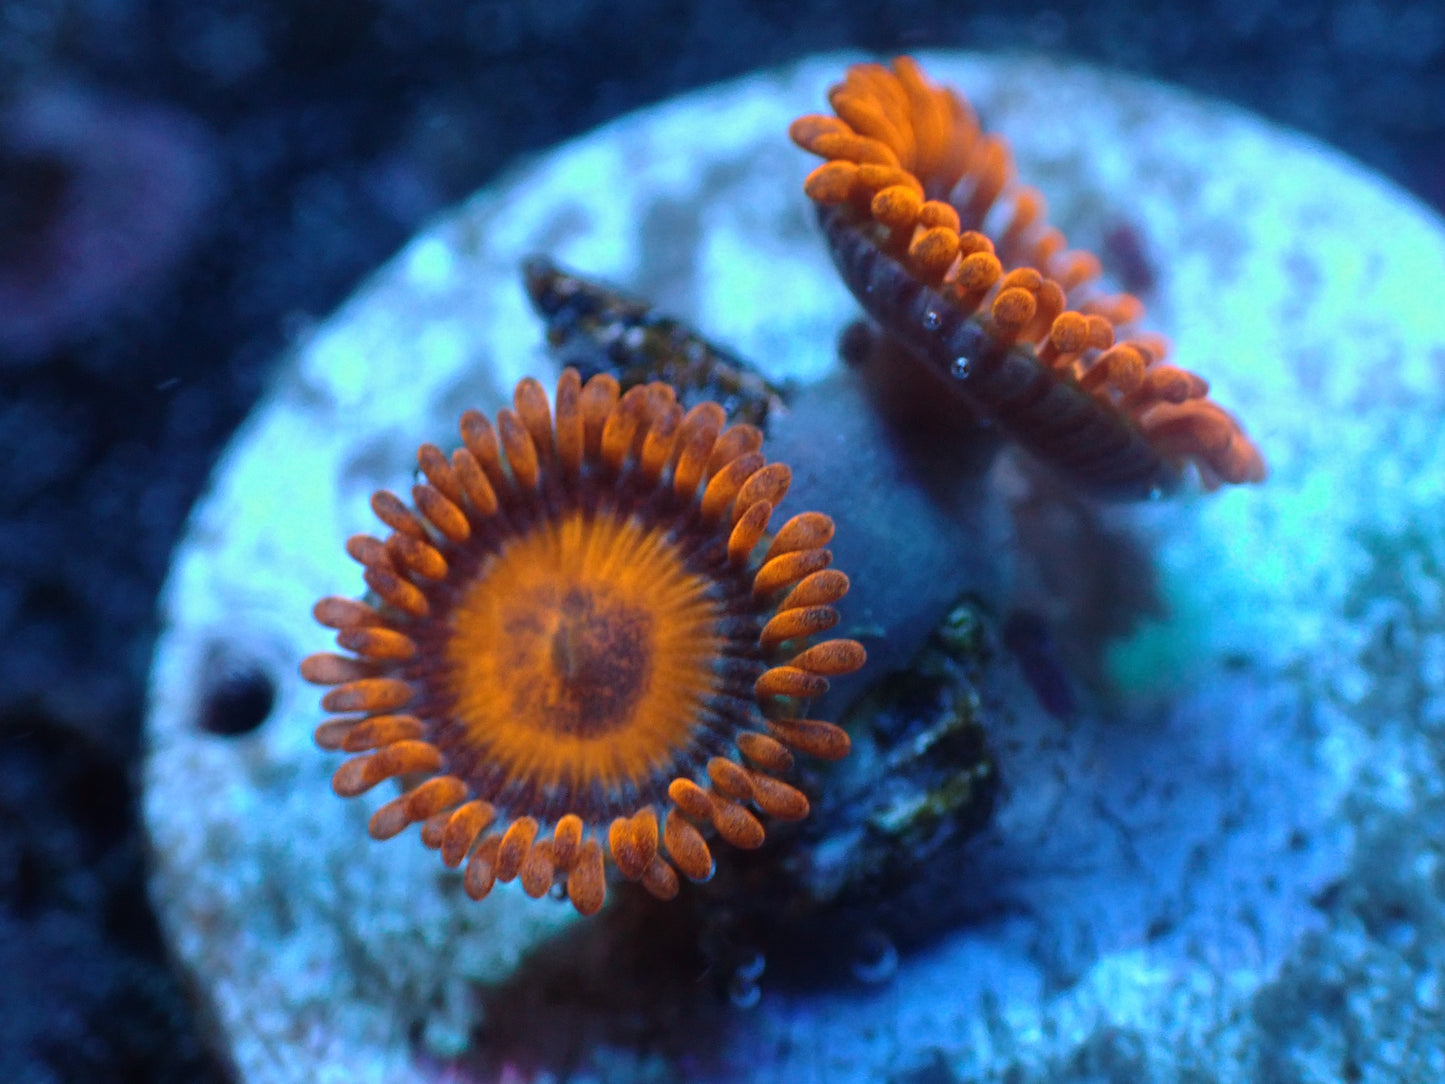 Orange Oxide Zoas Auctions 5/3 ended